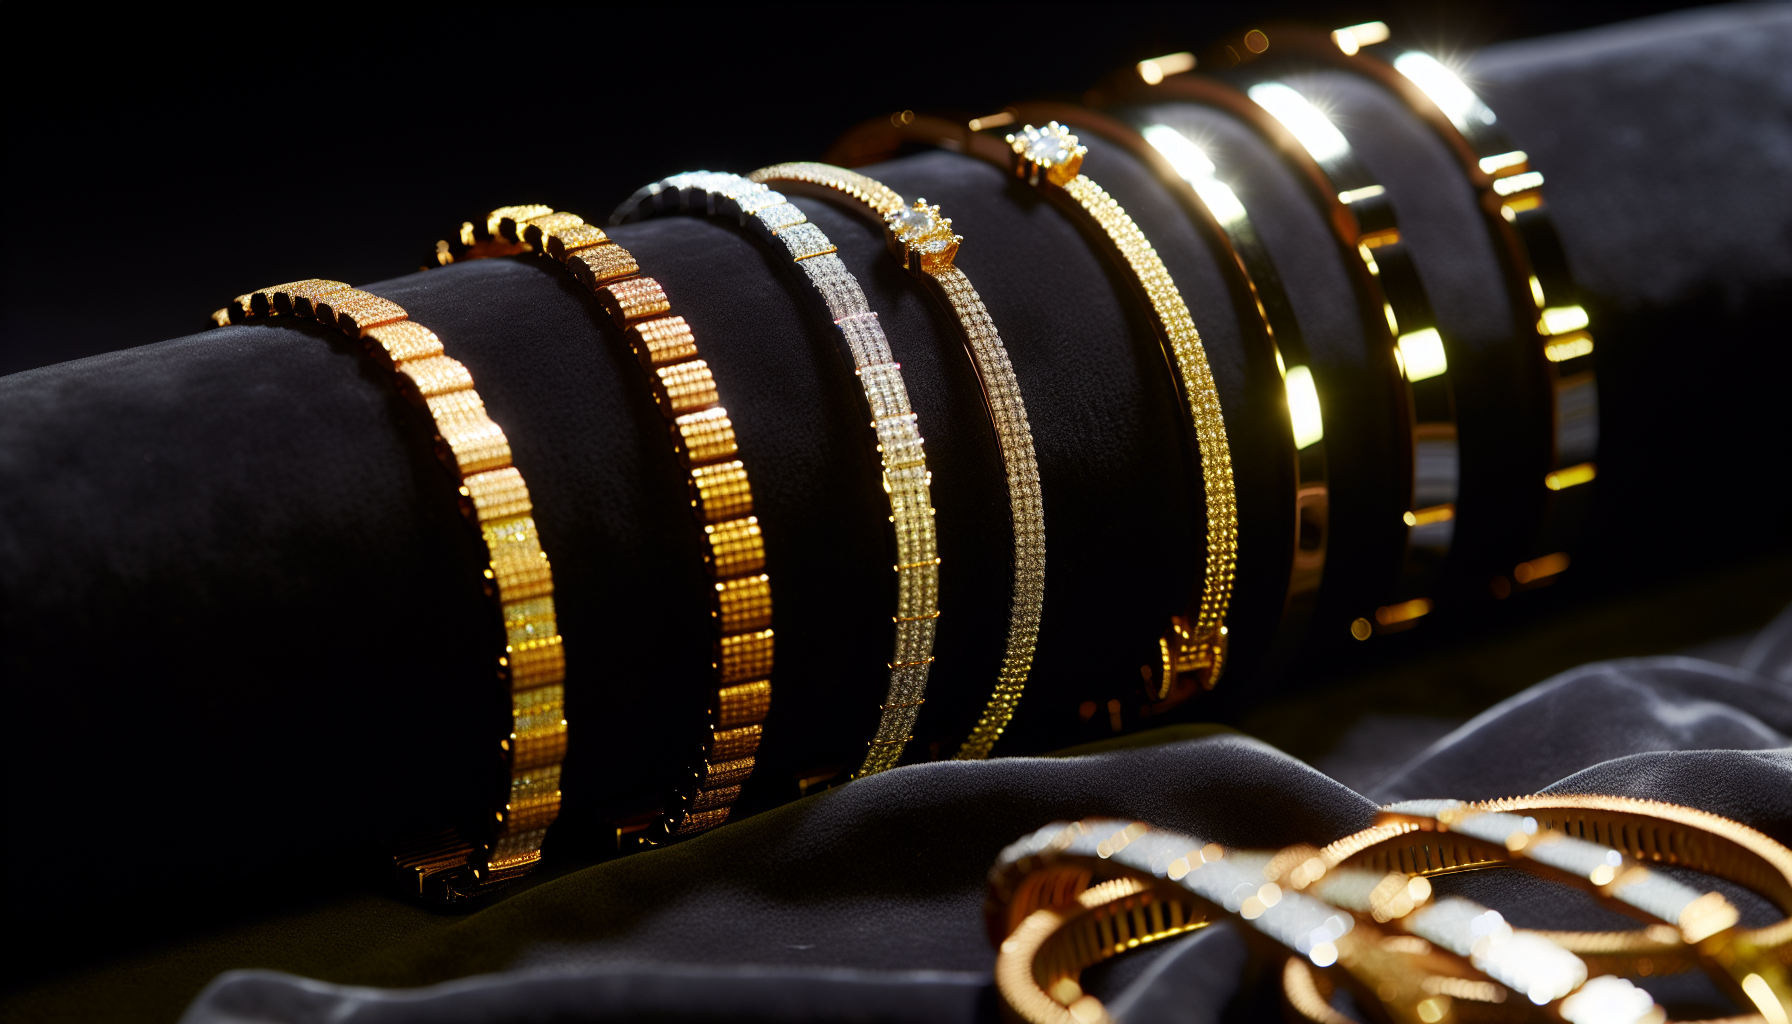 Variety of gold hues including white gold, yellow gold, and rose gold, providing options for bracelet customization